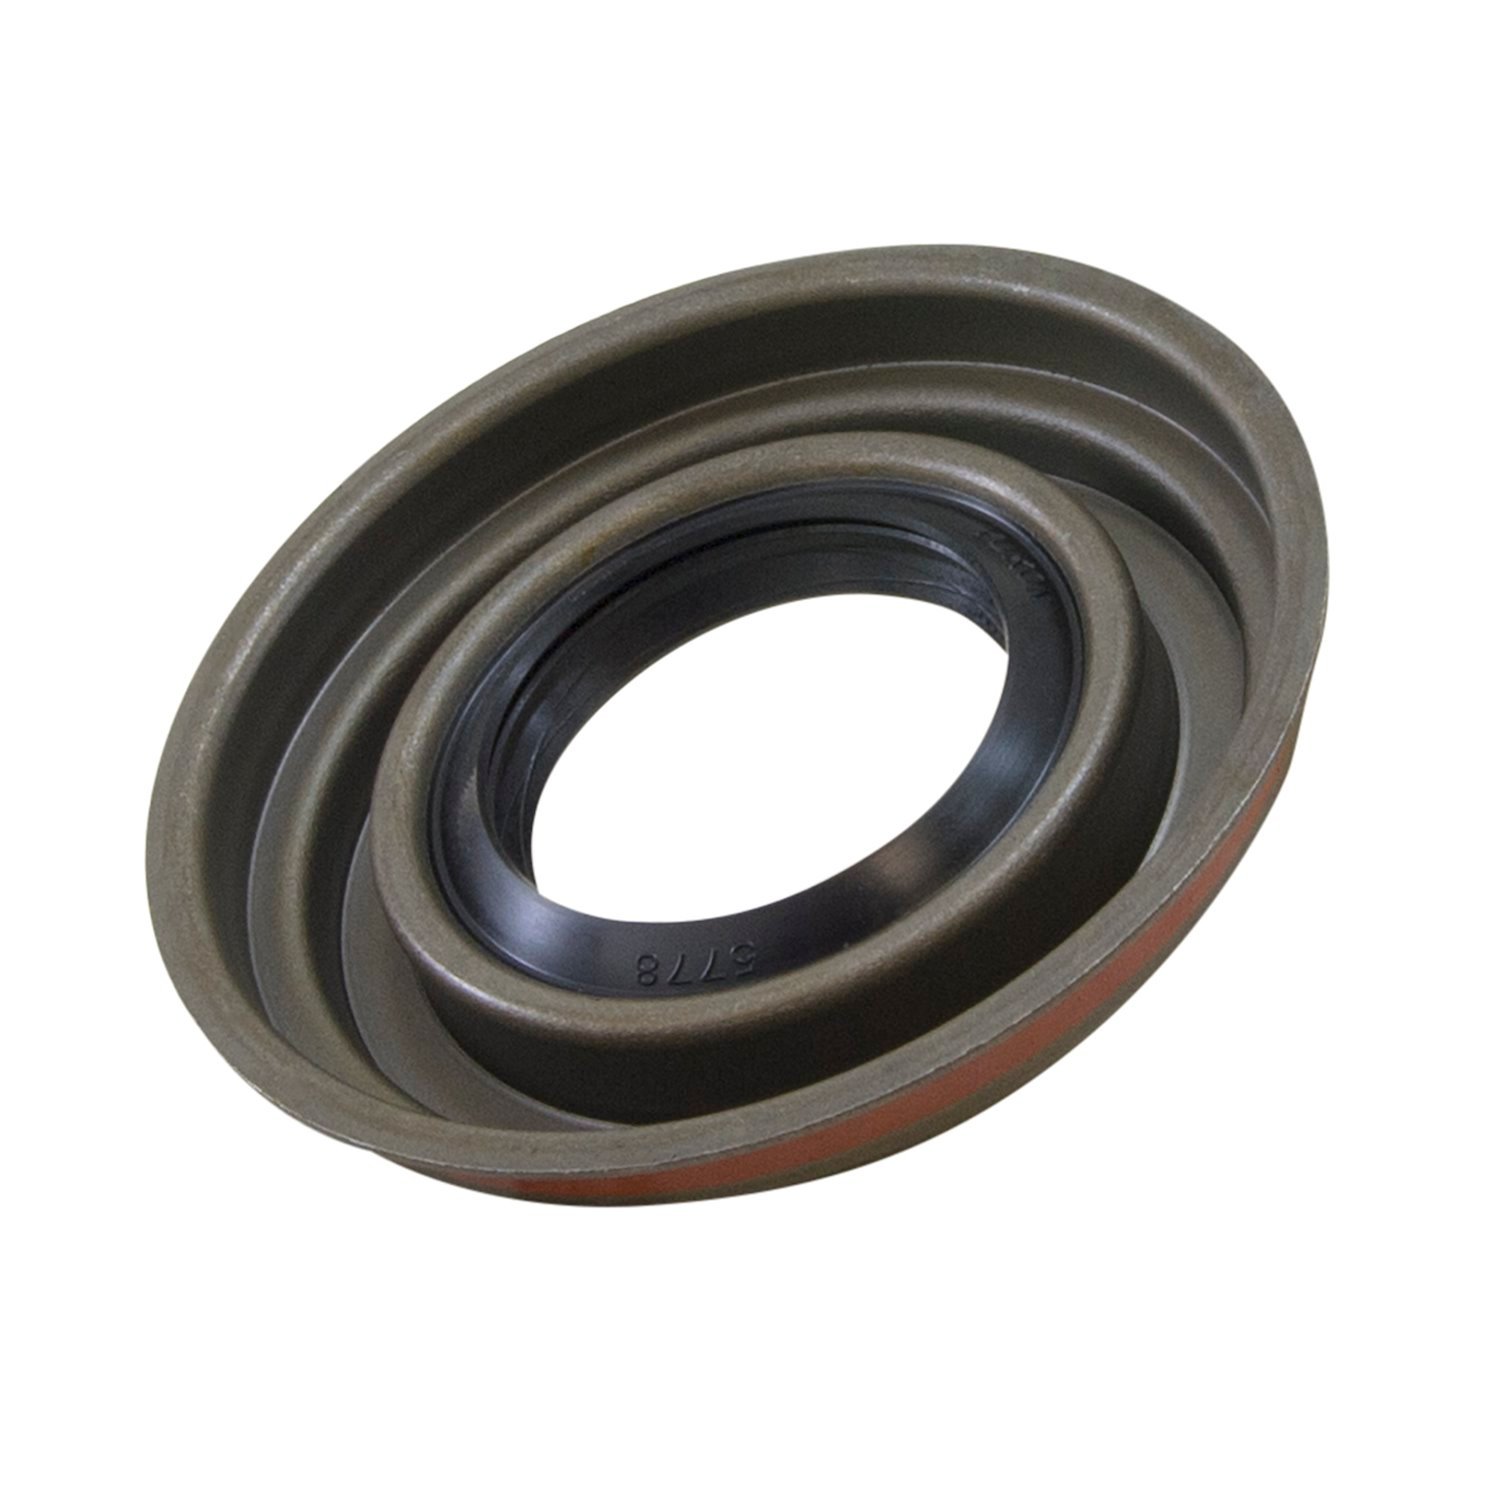 Replacement Dana 50 Pinion Seal, 1998-2000 Only